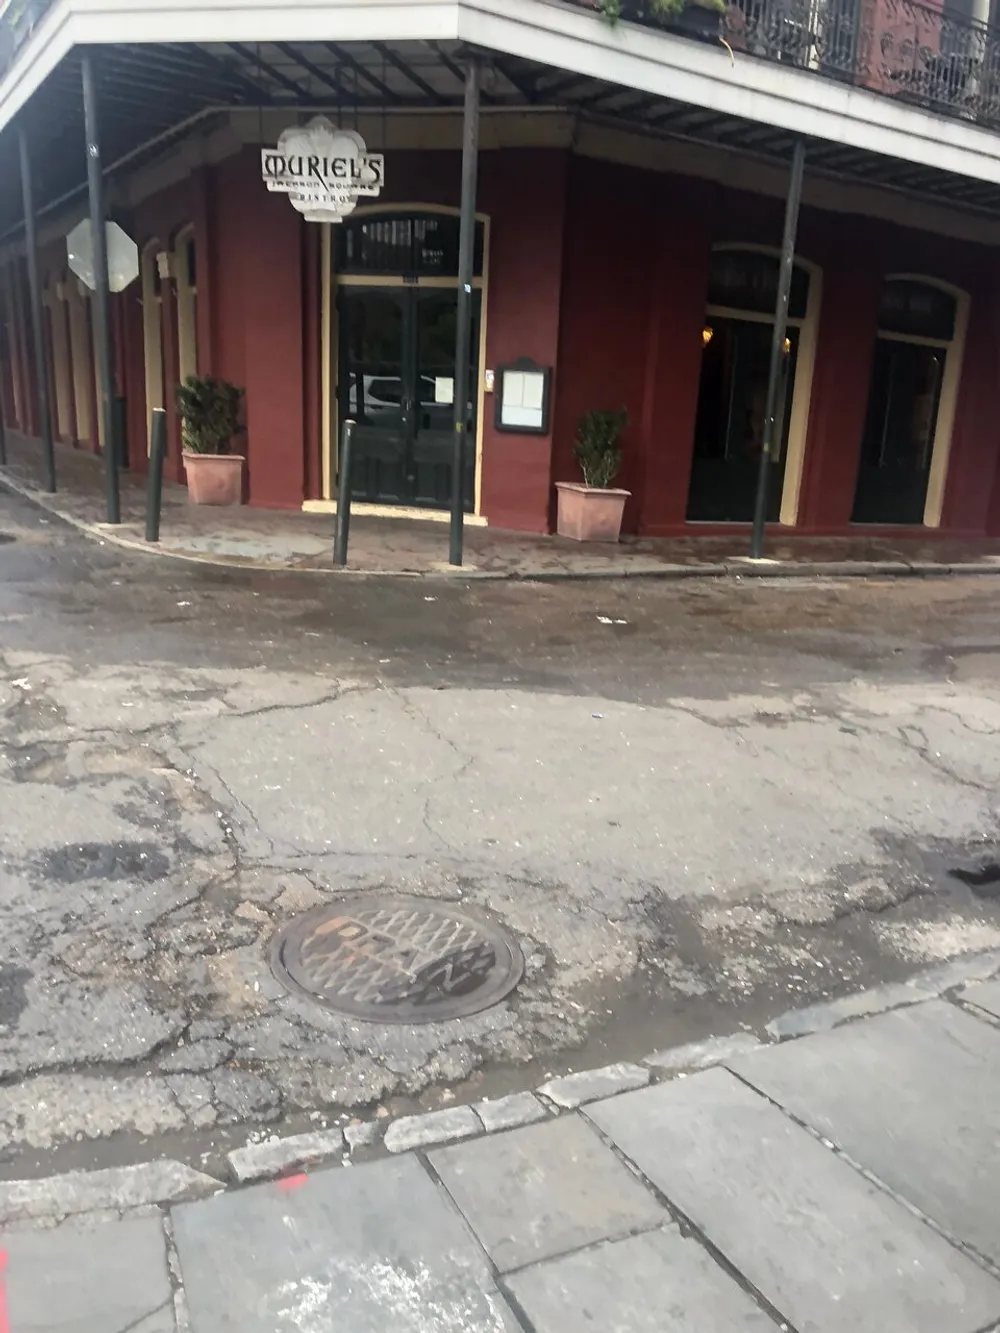 The image shows a red-colored building with an establishment named Muriels under a covered sidewalk with signs of wear on the street infrastructure including a pothole and a manhole cover